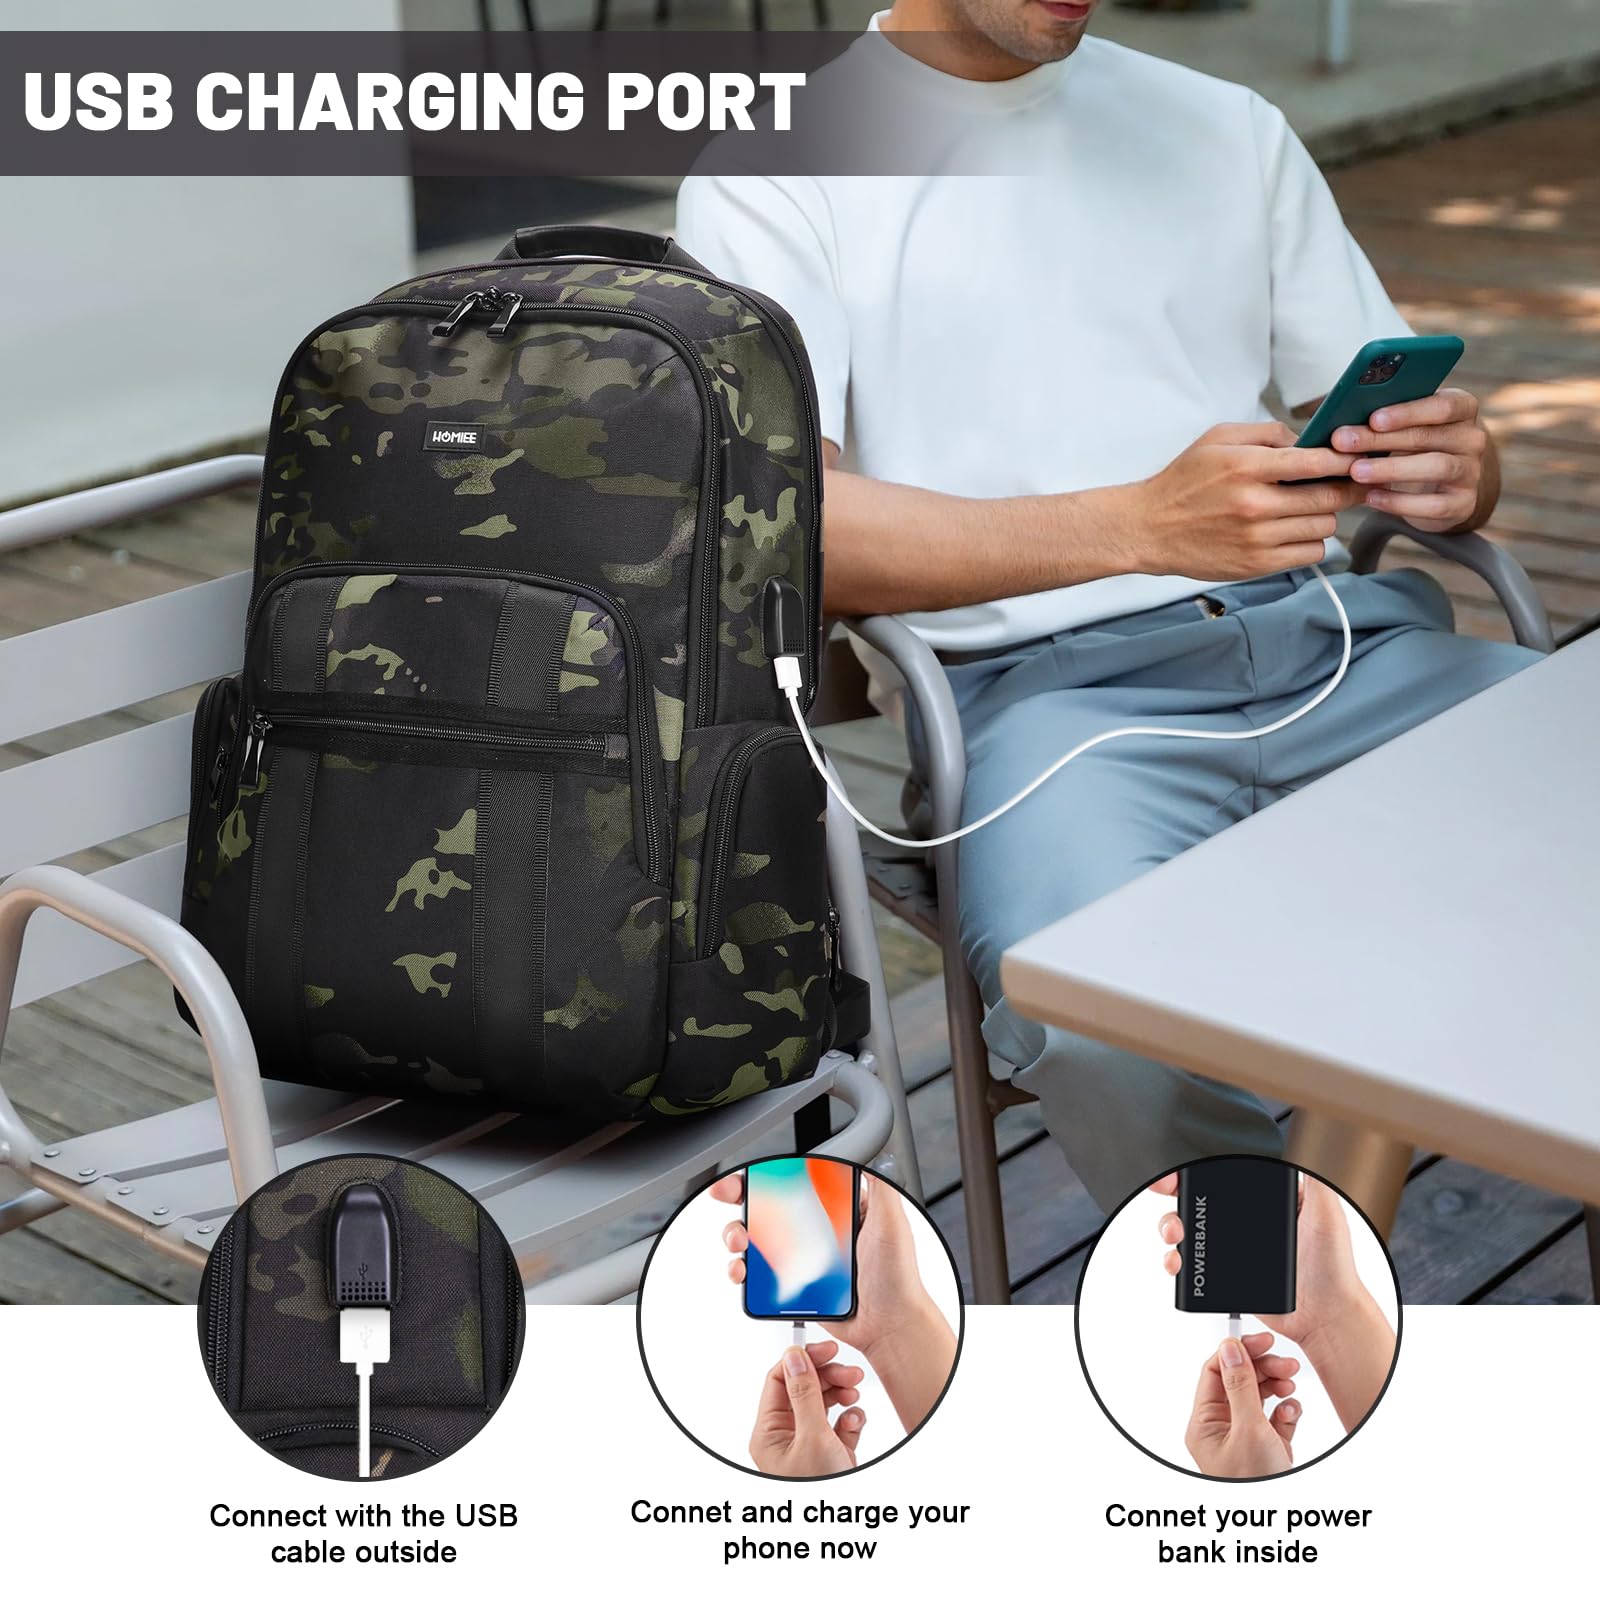 HOMIEE Travel Laptop Backpack 15.6 Inch Business Computer College Bag with USB Charging Port, Anti Theft Casual Daypack Carry On Backpack Hiking Rucksack for Men Women